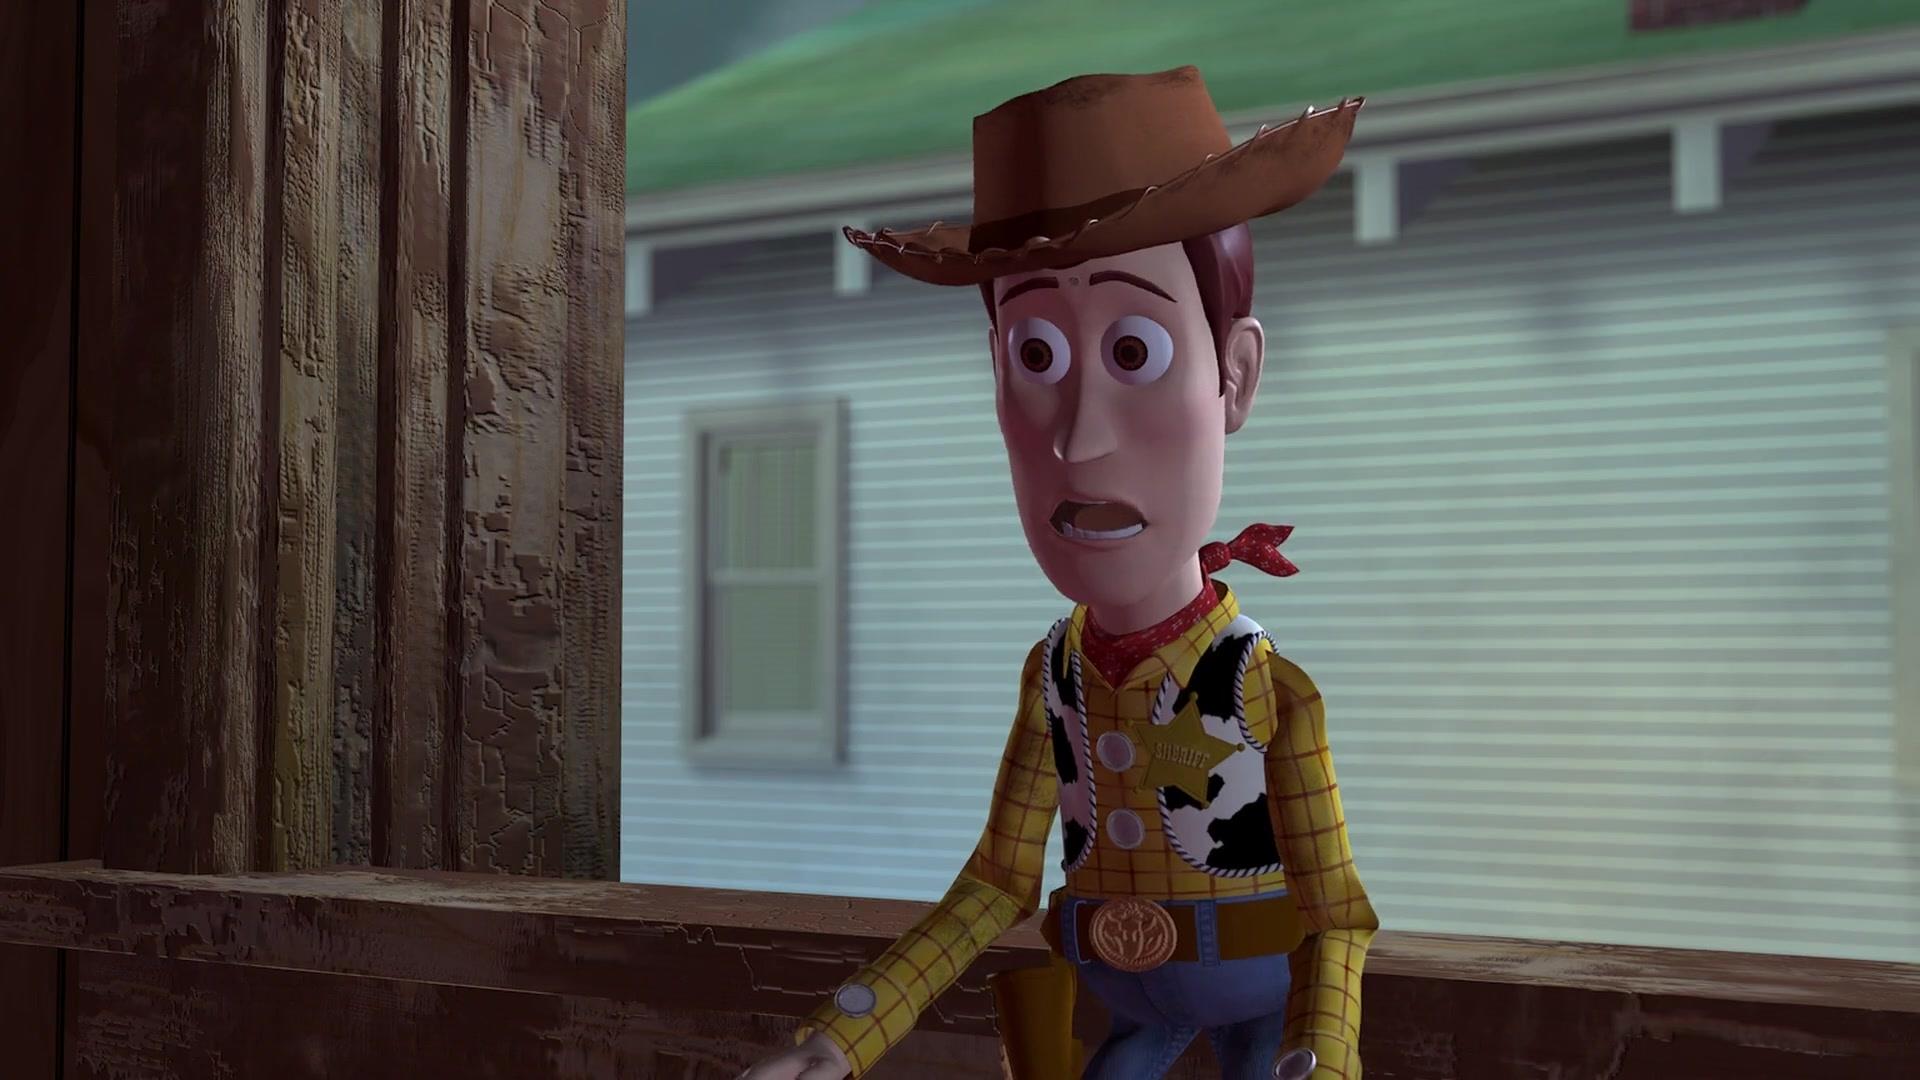 Get awesome Toy Story HD images in each new Chrome tab! 